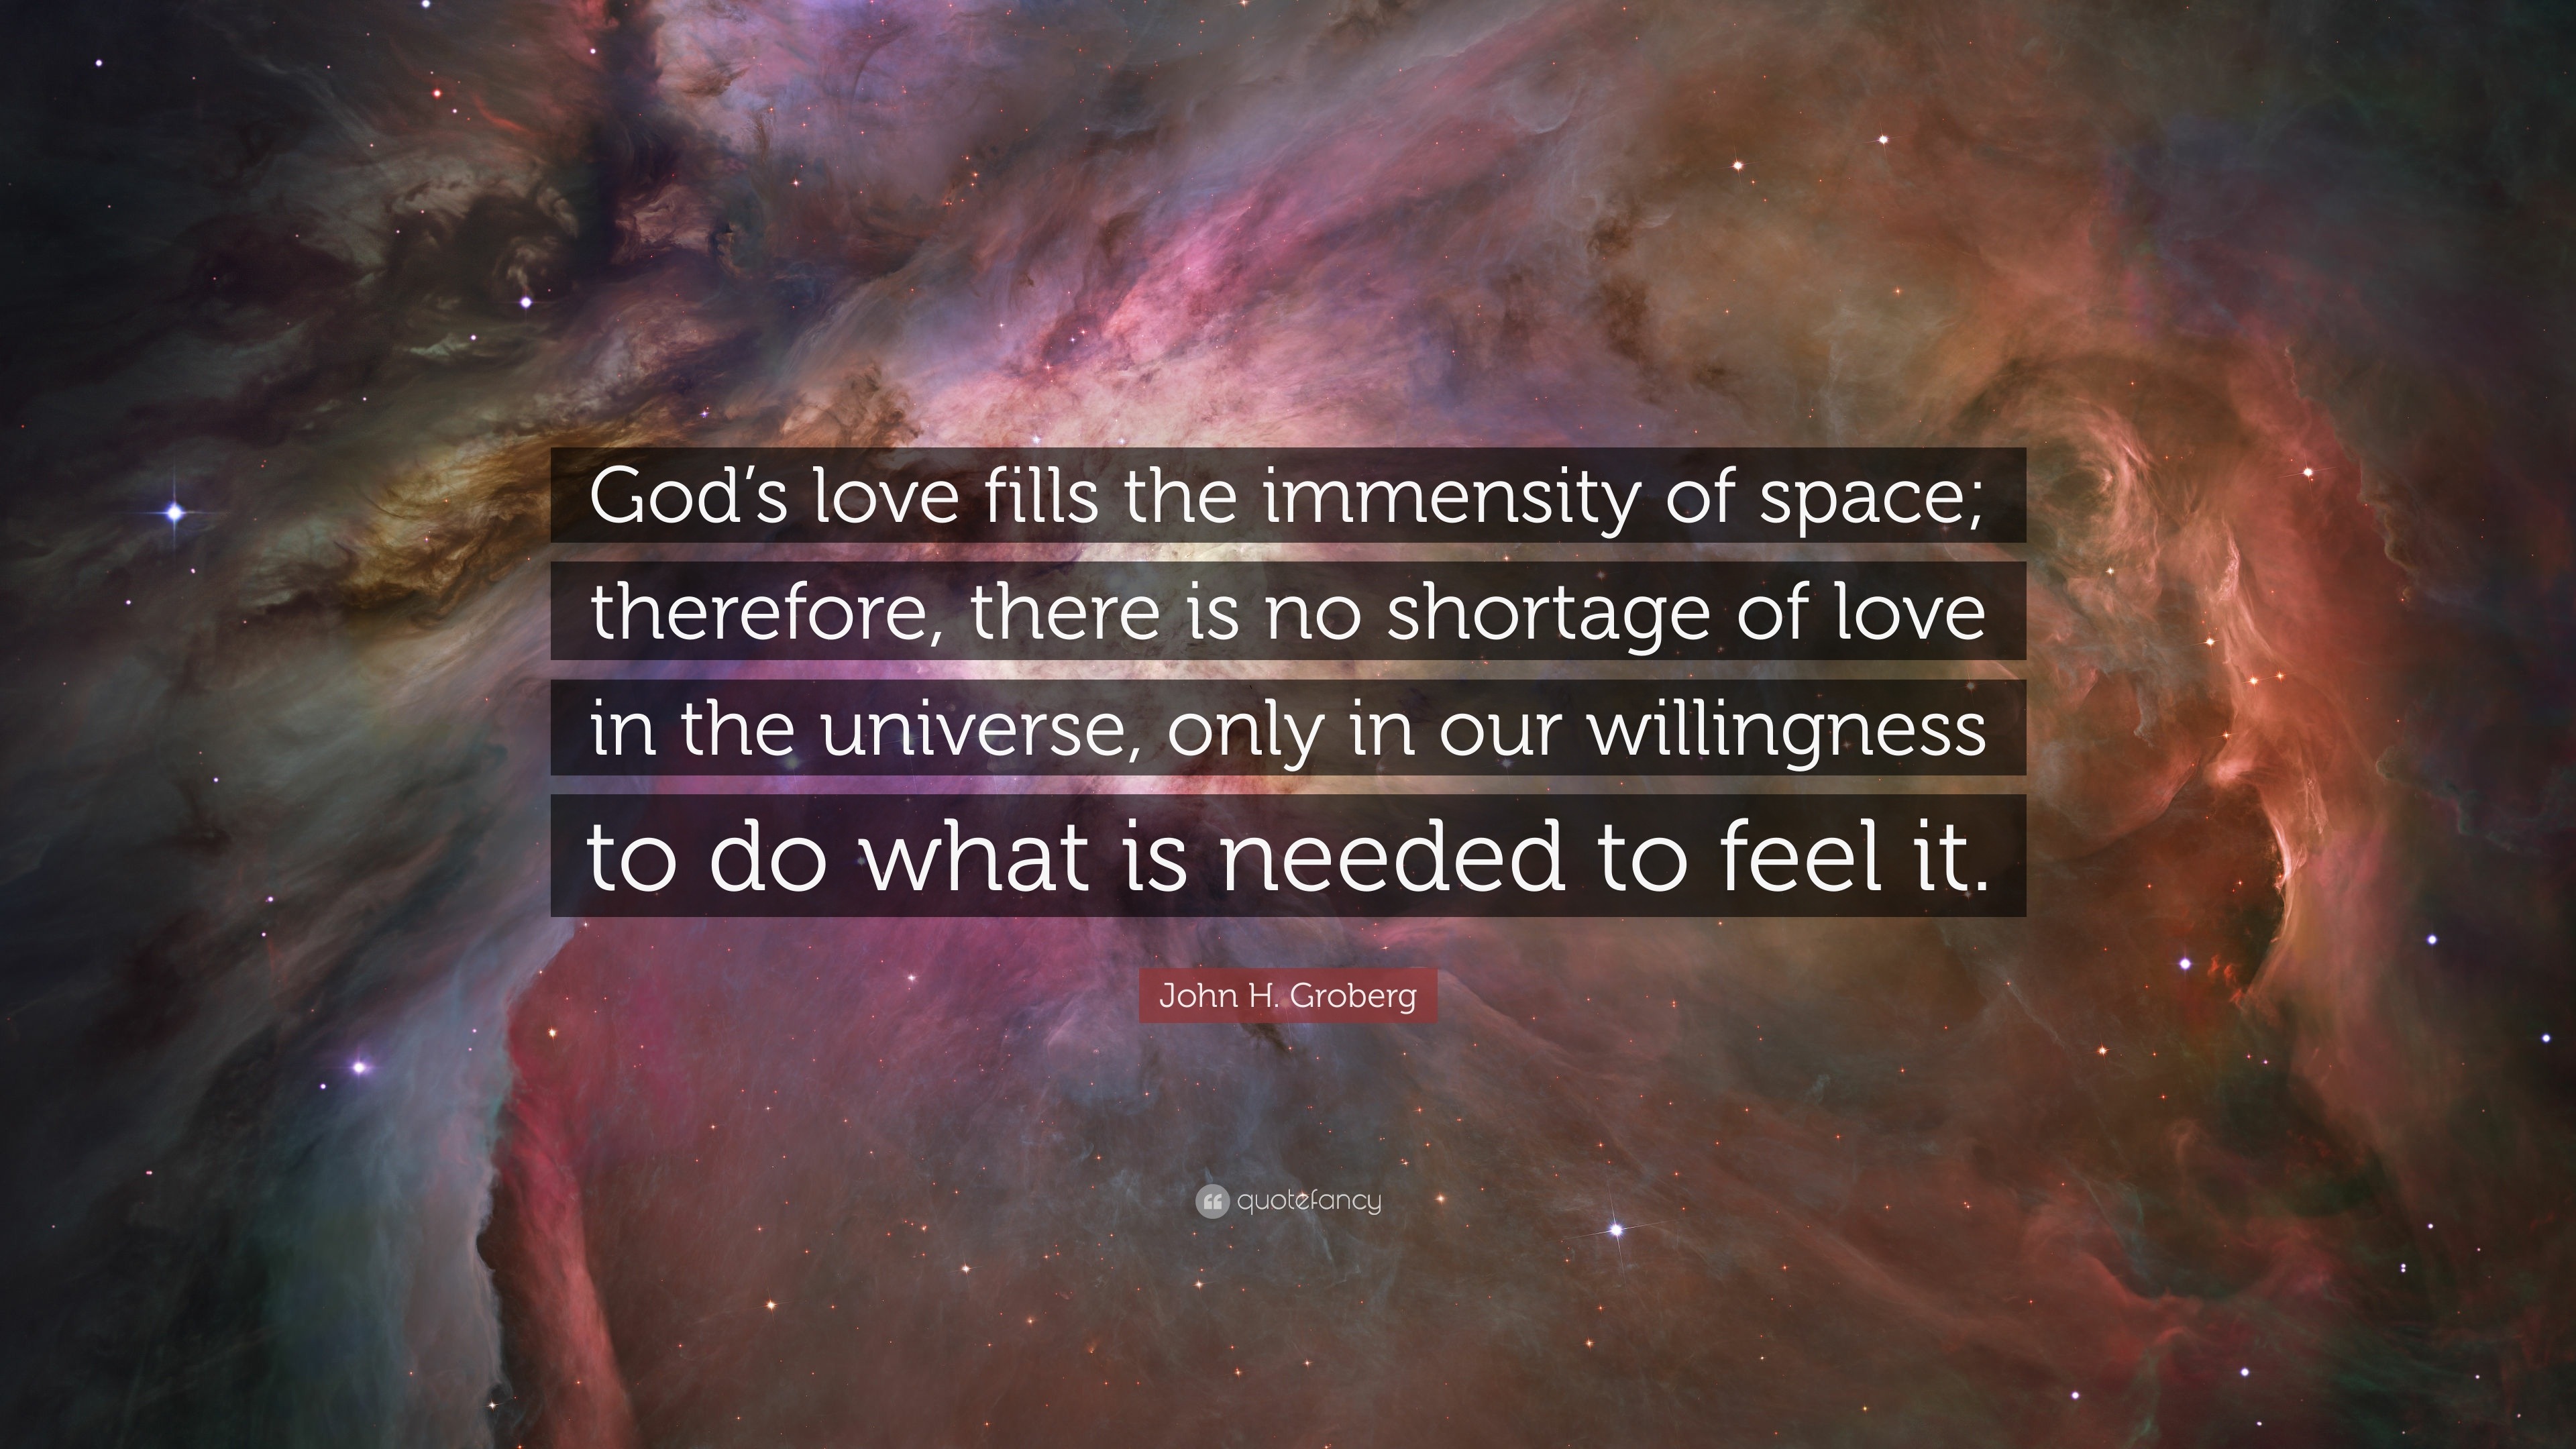 John H. Groberg Quote: “God's Love Fills The Immensity Of Space; Therefore, There Is No Shortage Of Love In The Universe, Only In Our Willingnes...”